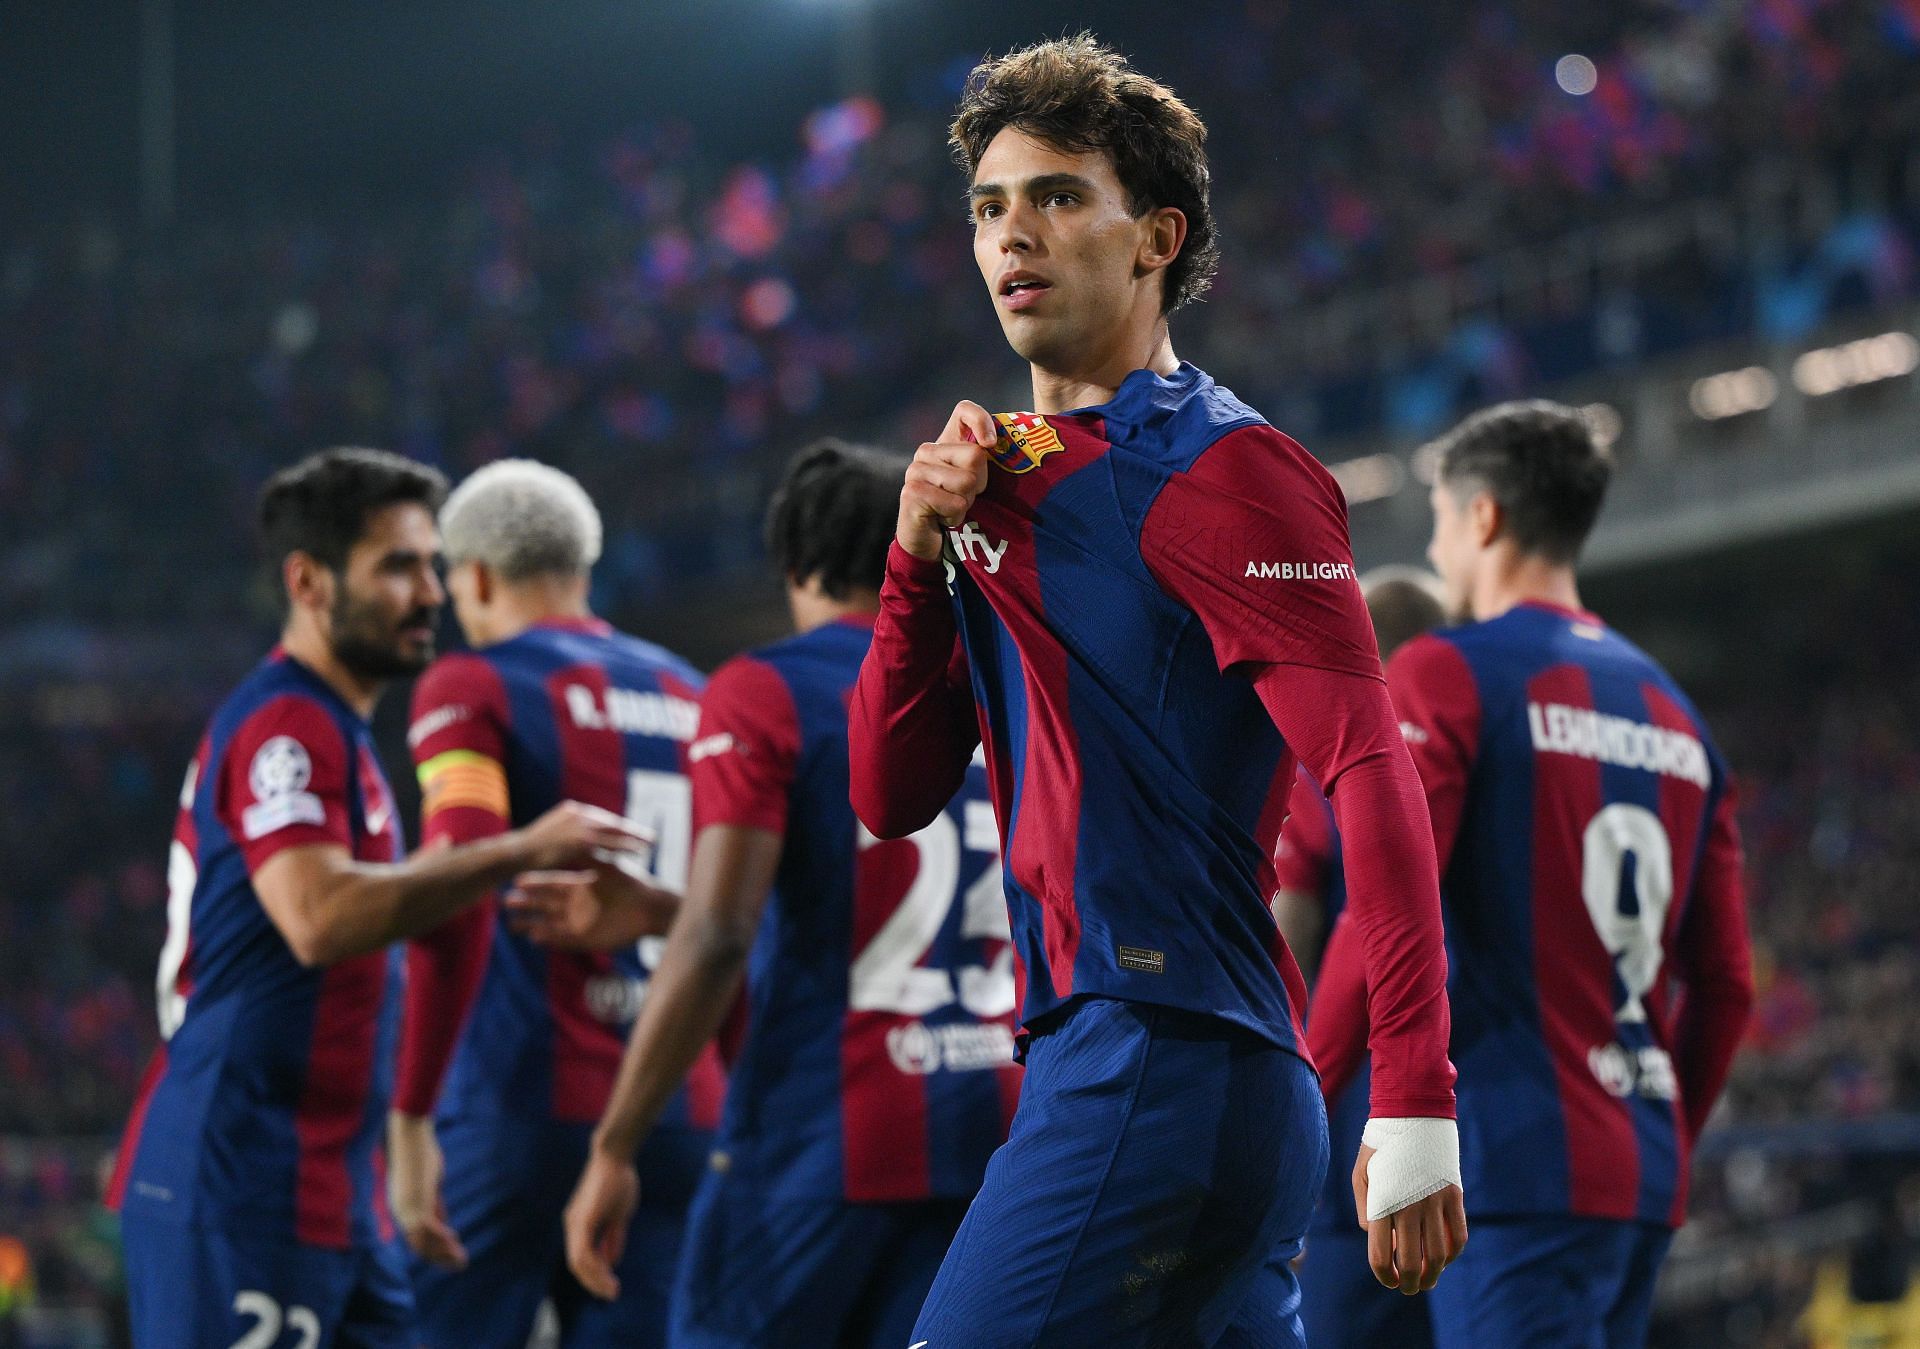 Joao Felix arrived at the Camp Nou this summer.